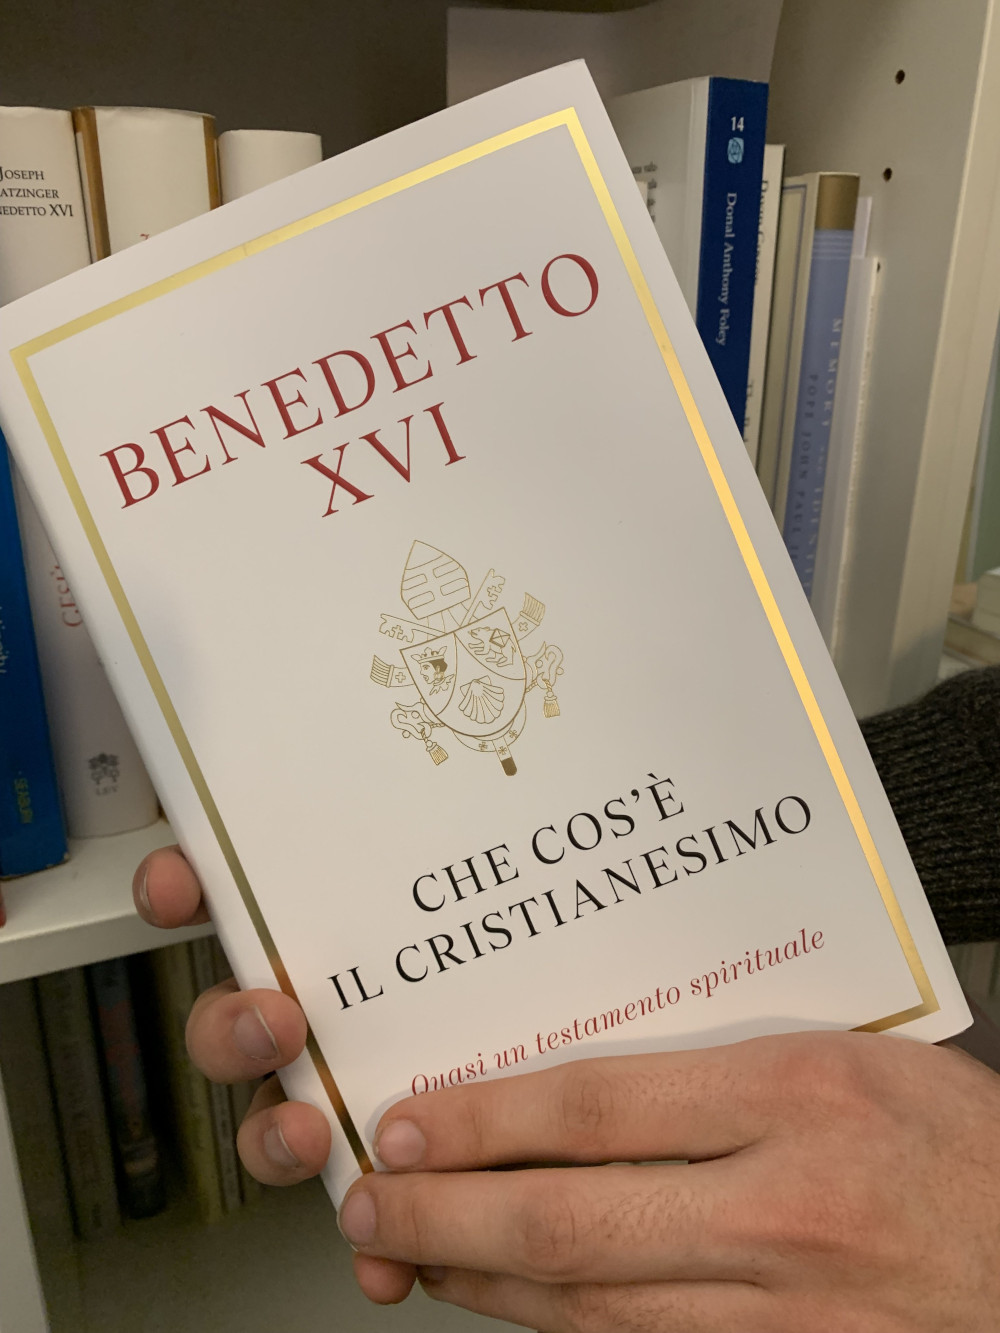 Hands hold up the book "Benedetto XI: Che cos'e il Cristanesmio" with a white and gold cover